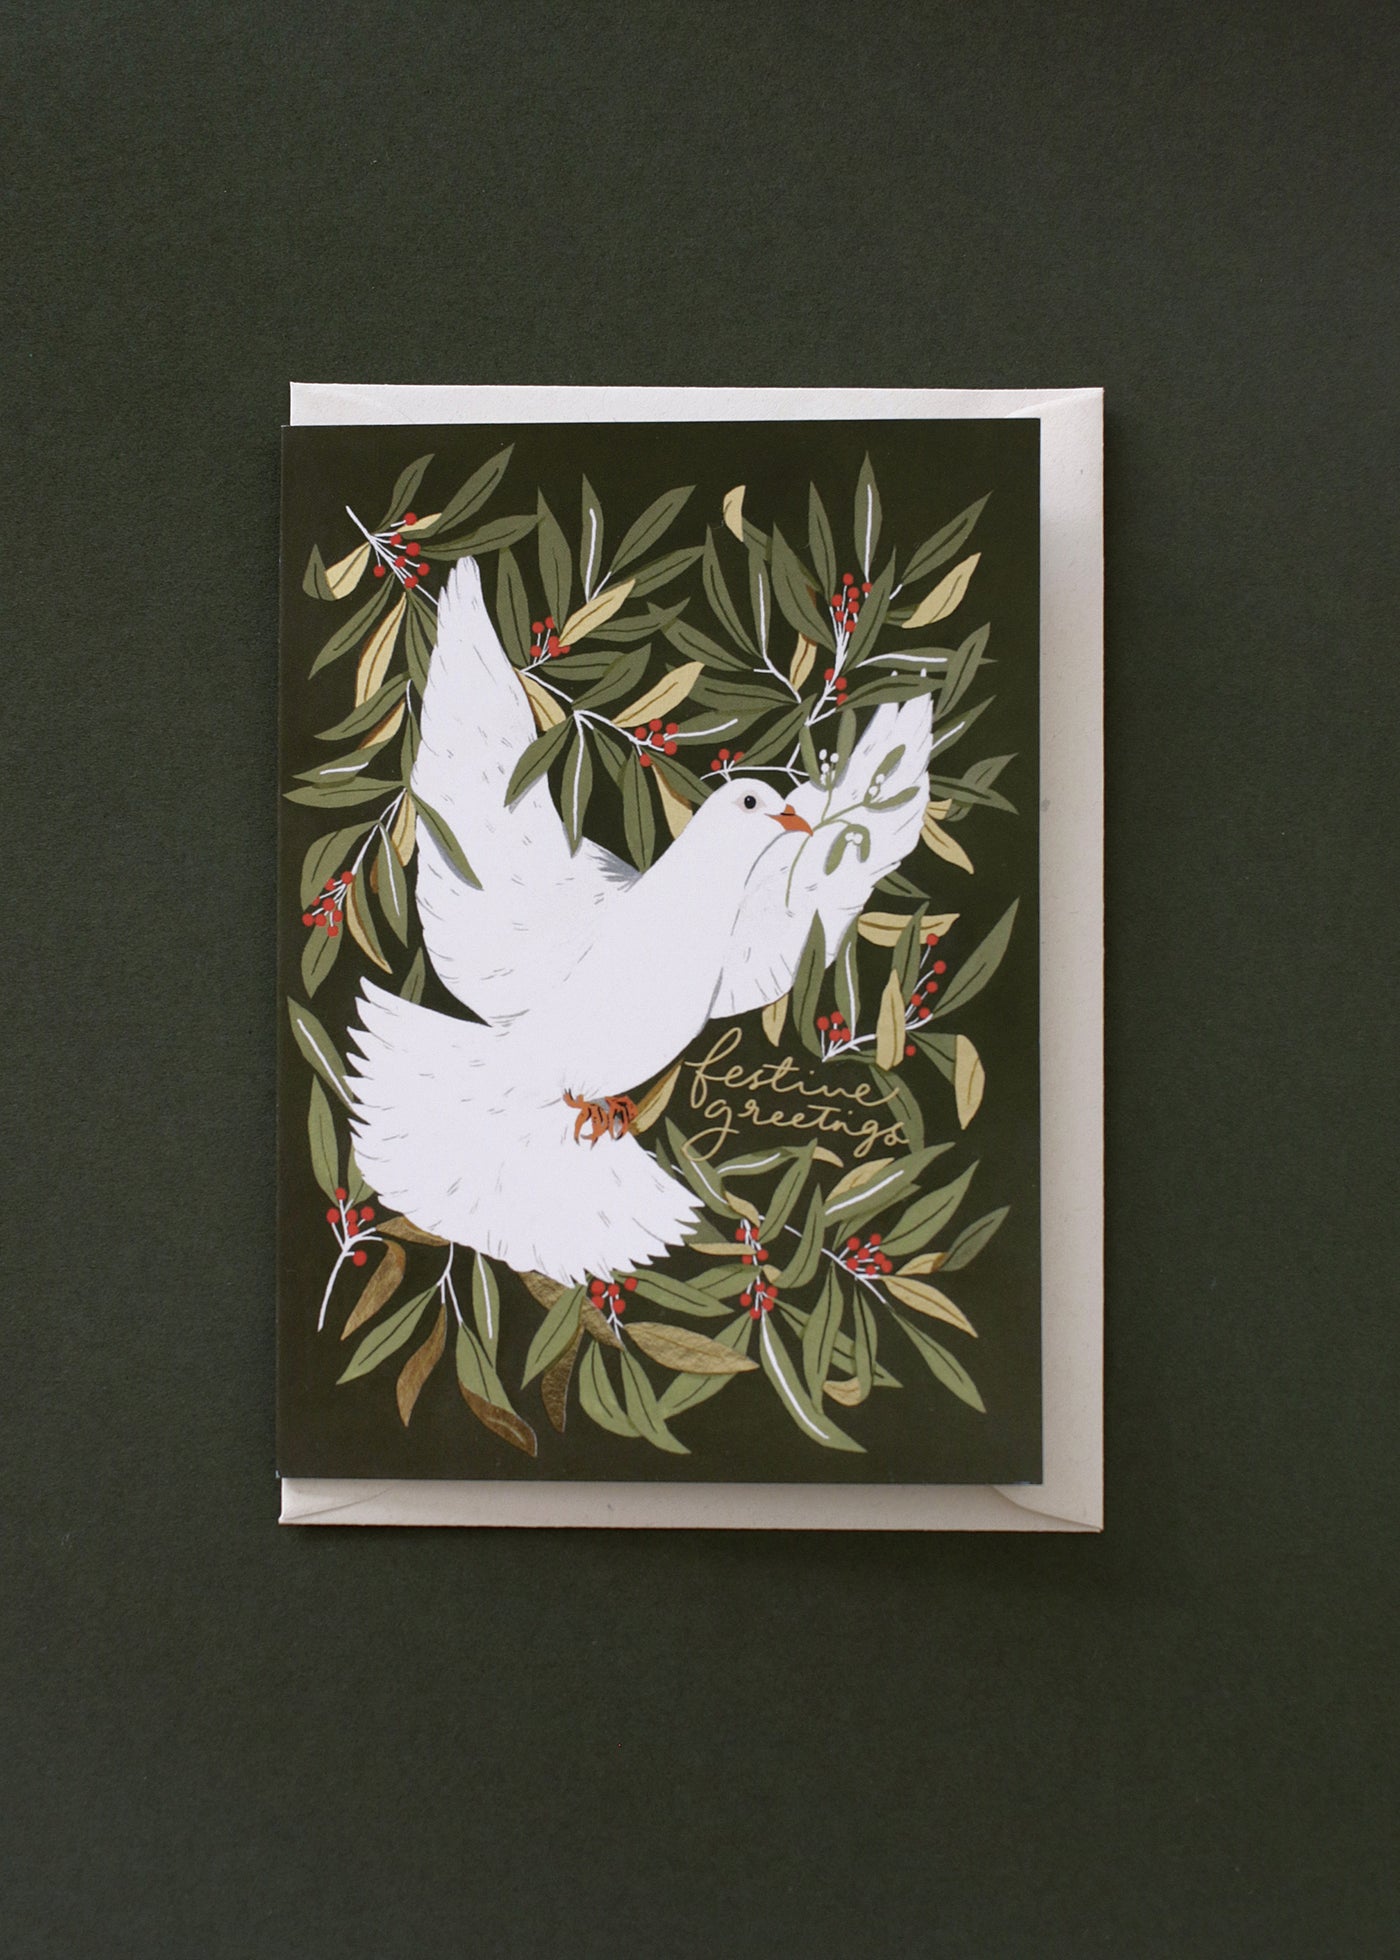 A beautiful, deep-green Christmas card with an illustrated bird design. It is finished with lovely gold foil details, and comes with a recycled cream envelope.